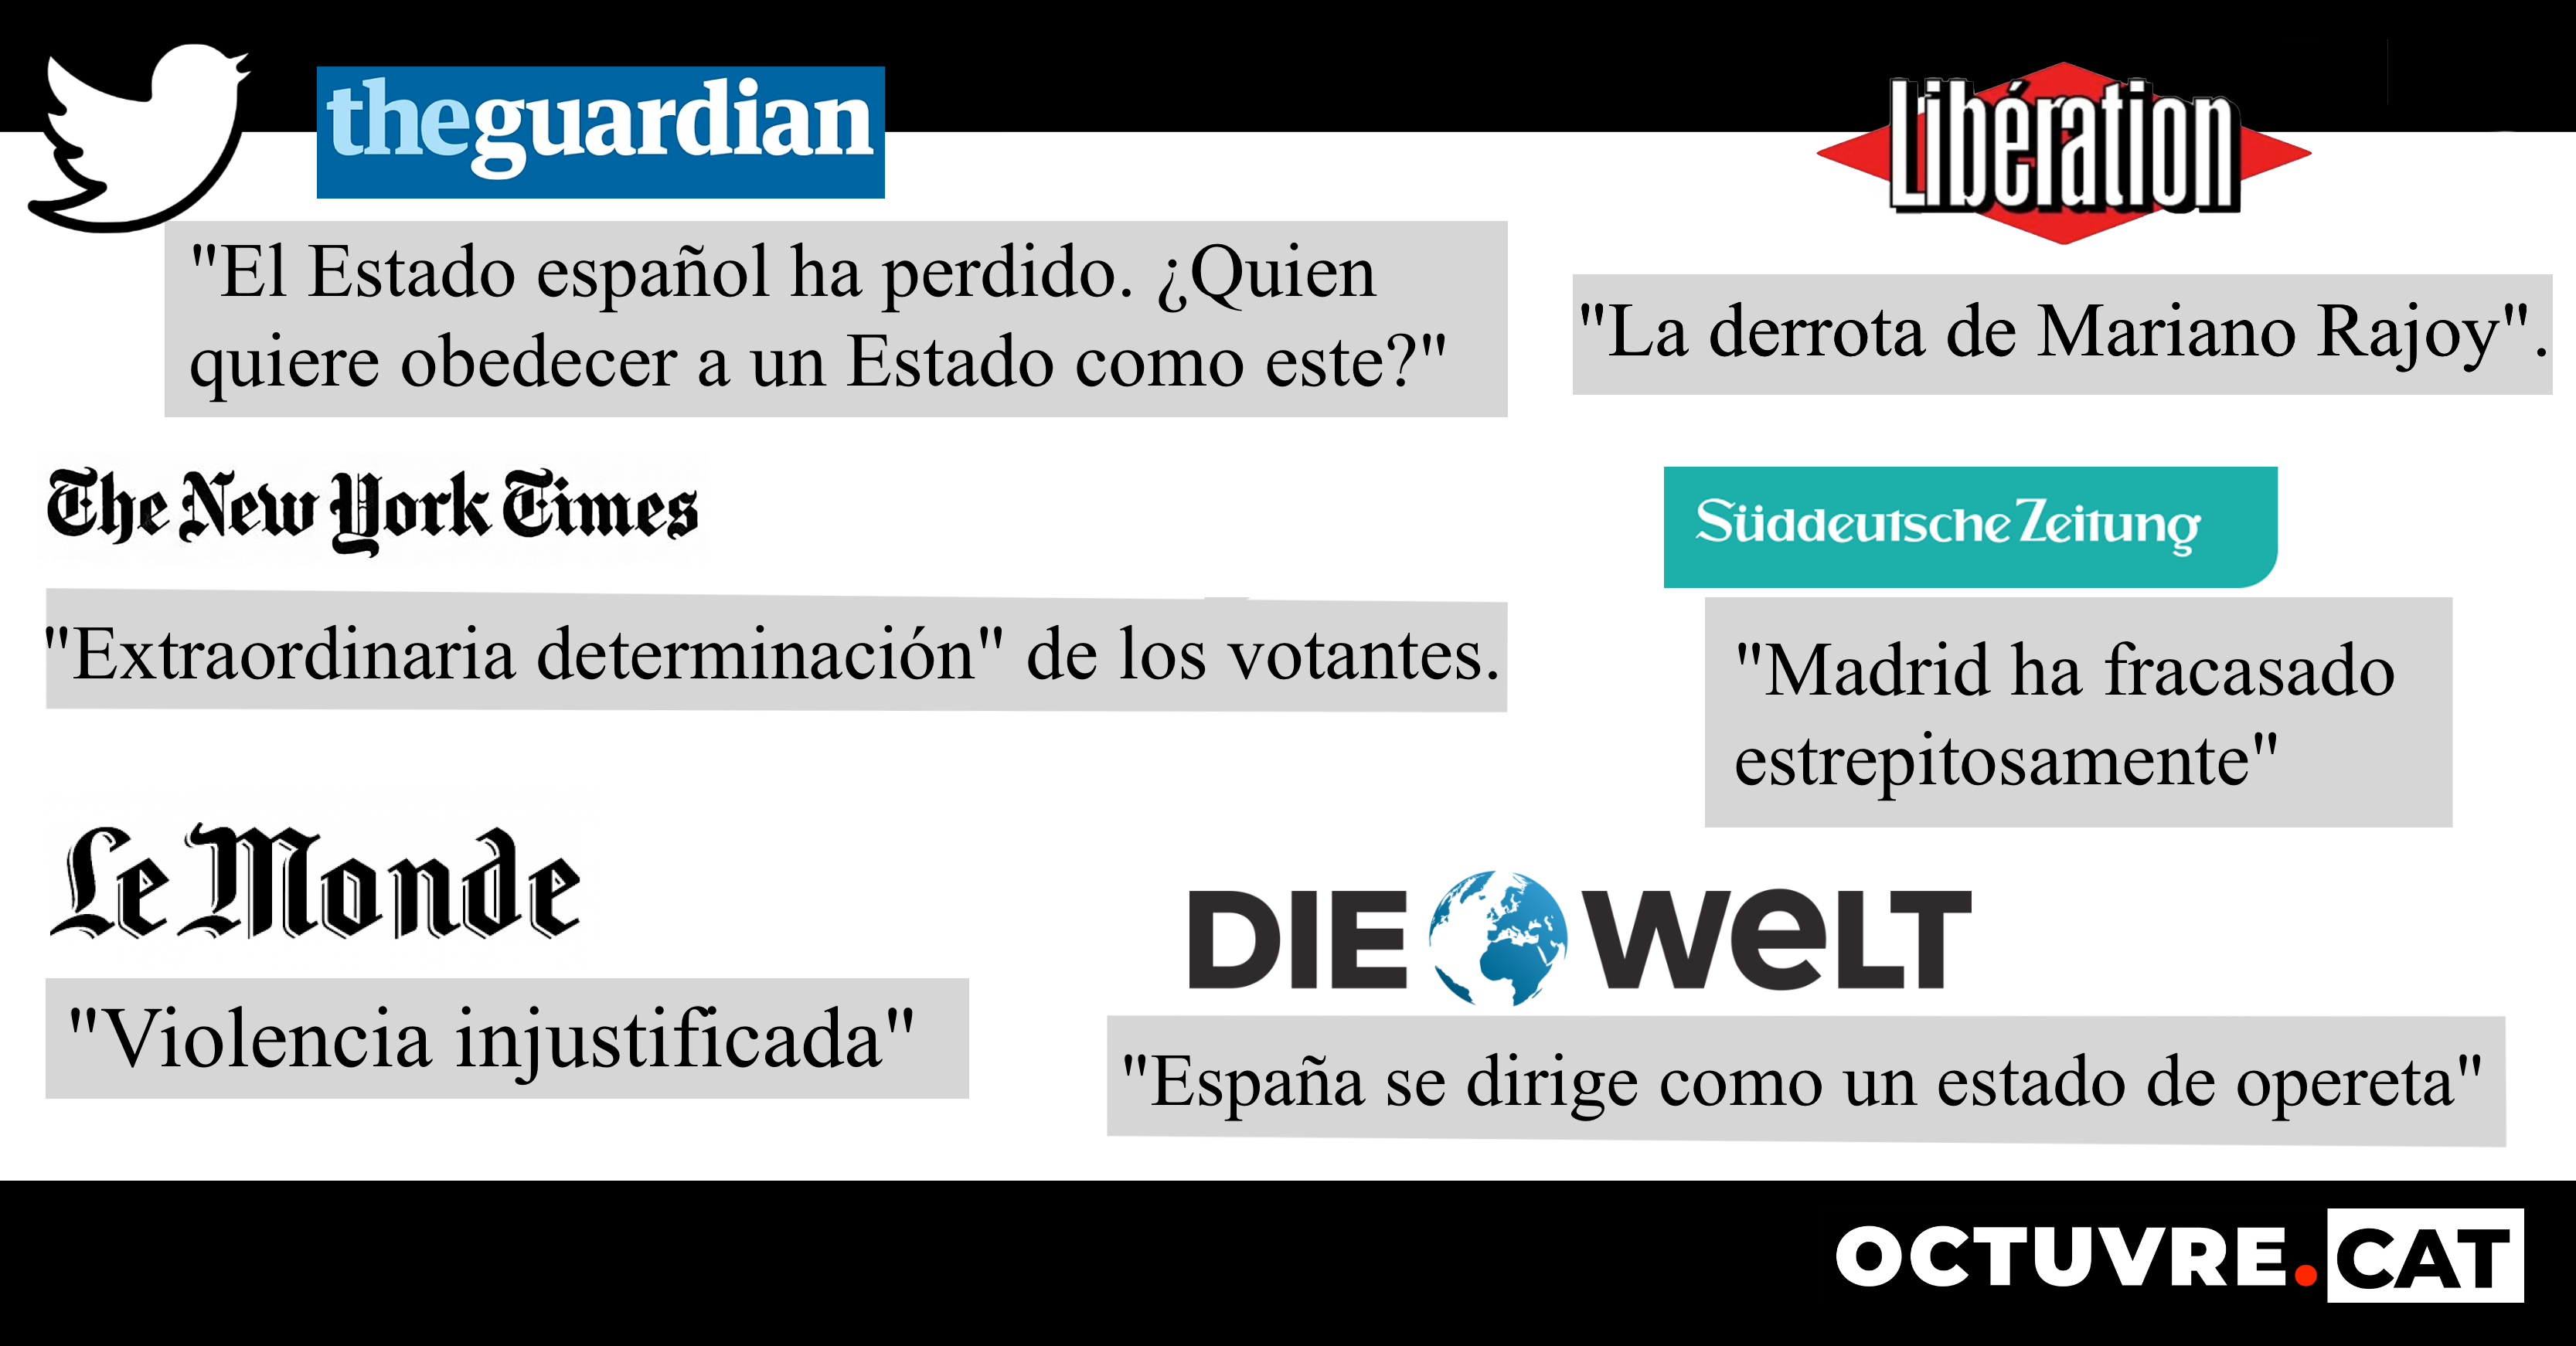 Octuvre hace rectificar a The Washington Post.